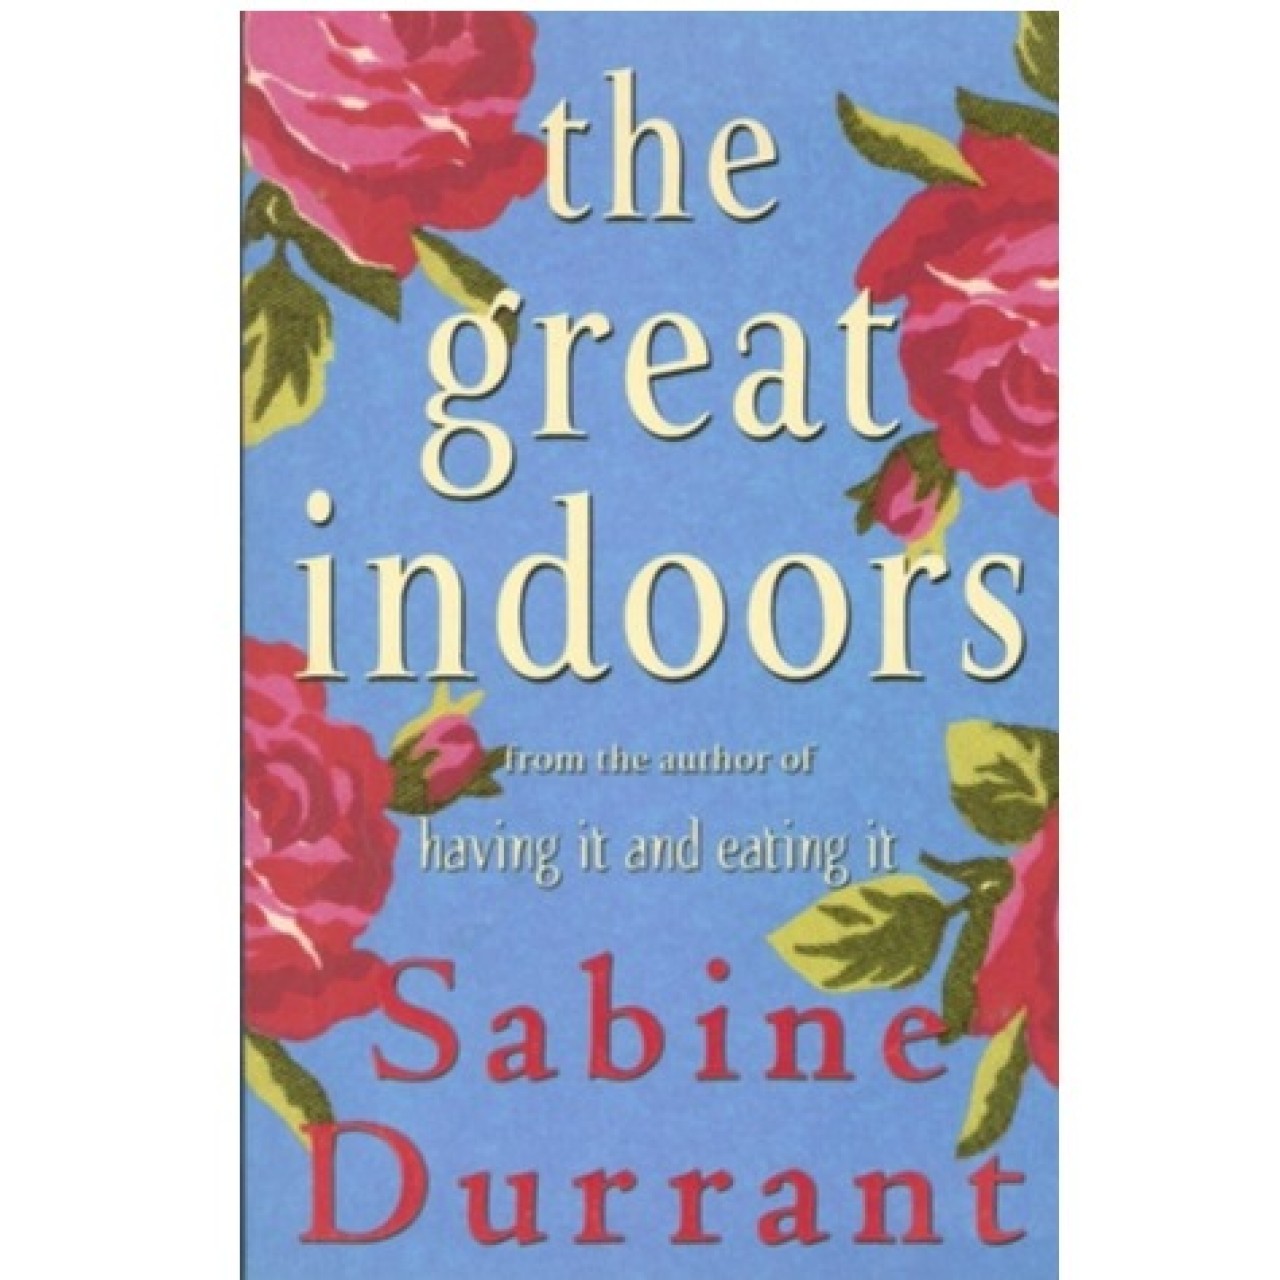 The Great Indoors By Sabine Durrant – Paperback 2013